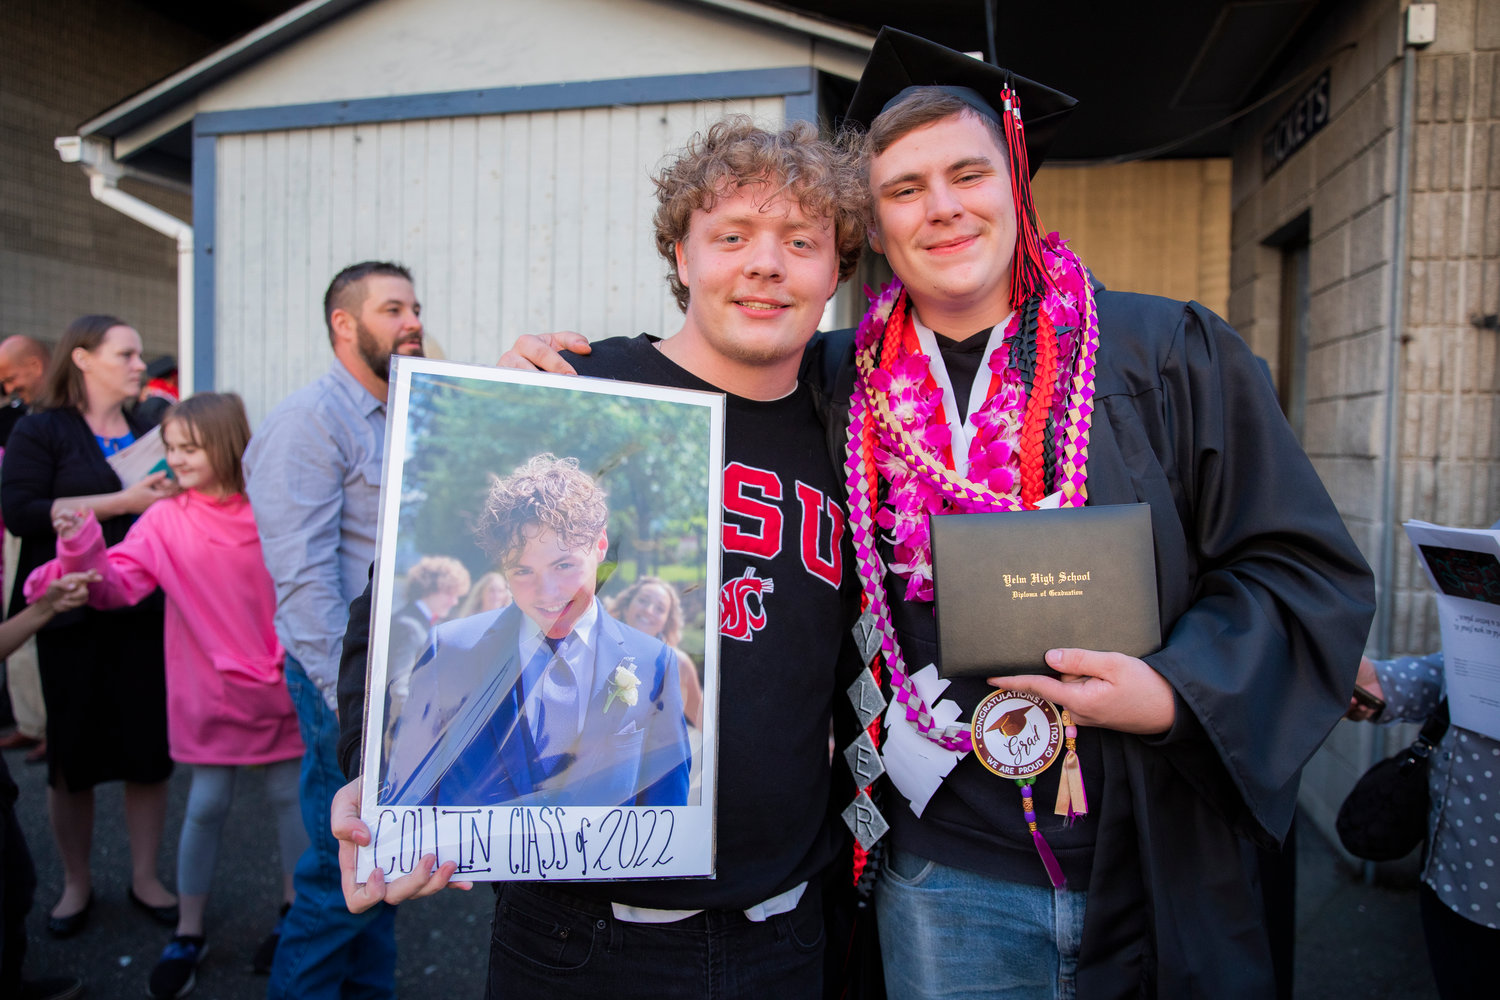 A graduate stands with a photo in memorial of Collin McLaren, who died during his senior year of high school.